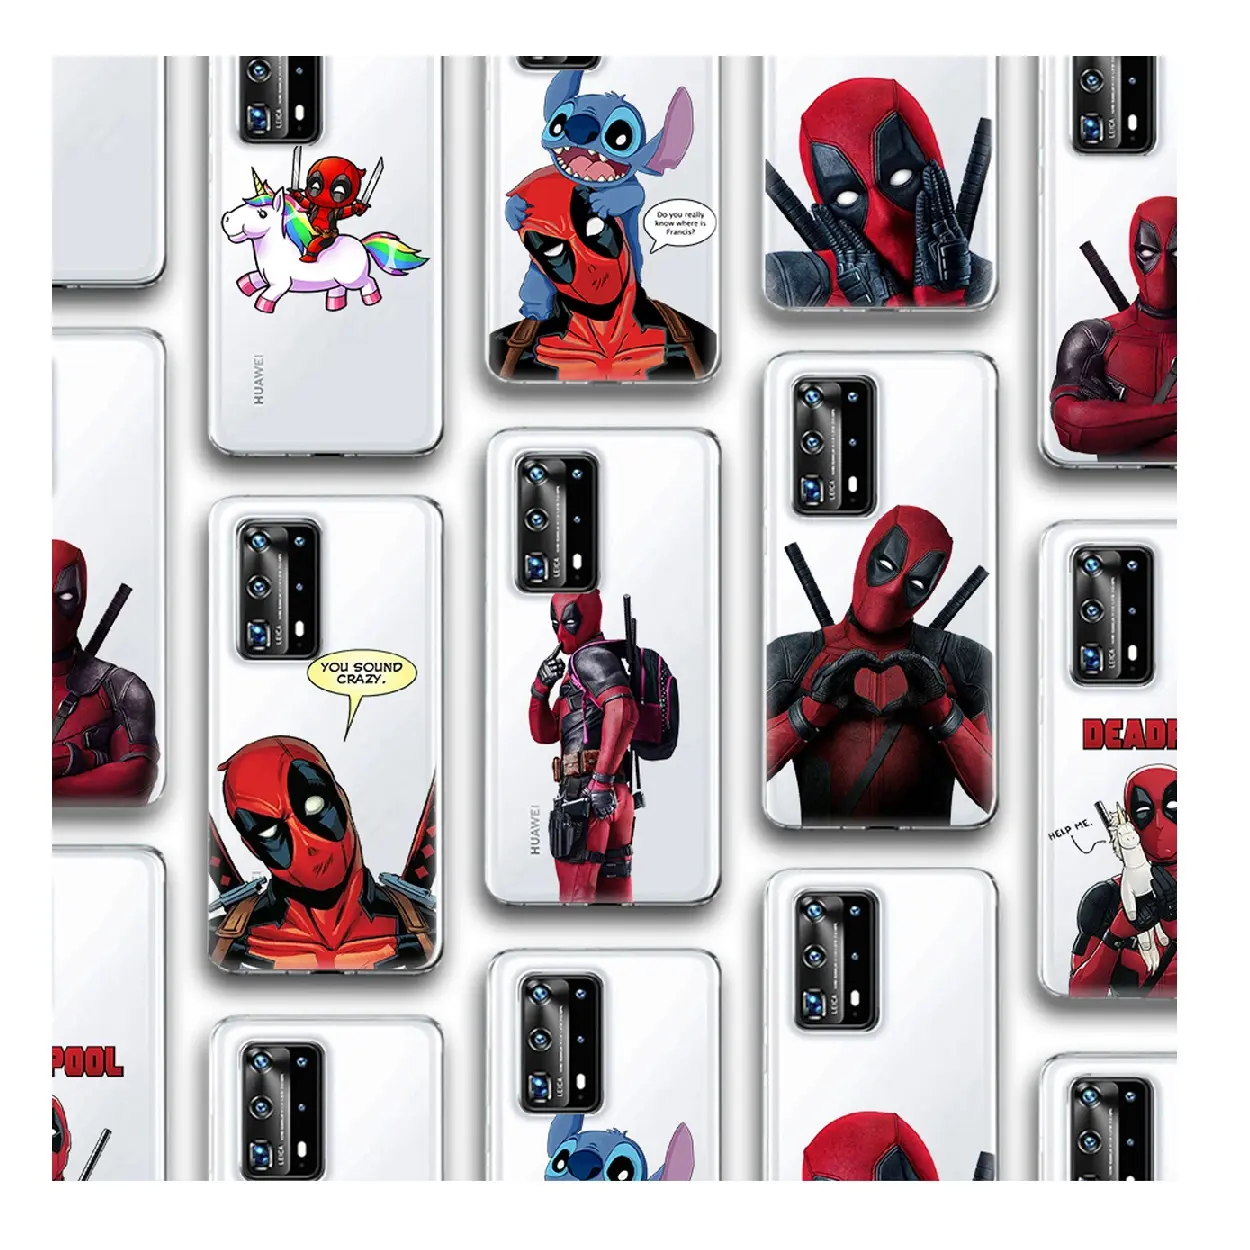 Marvel Deadpool Clear TPU Case UV Printing Silicone Cover For Huawei P40 P30 Mate 10 20 Honor Nova 8X 8C 8 9 10 20 Lite 7A Pro